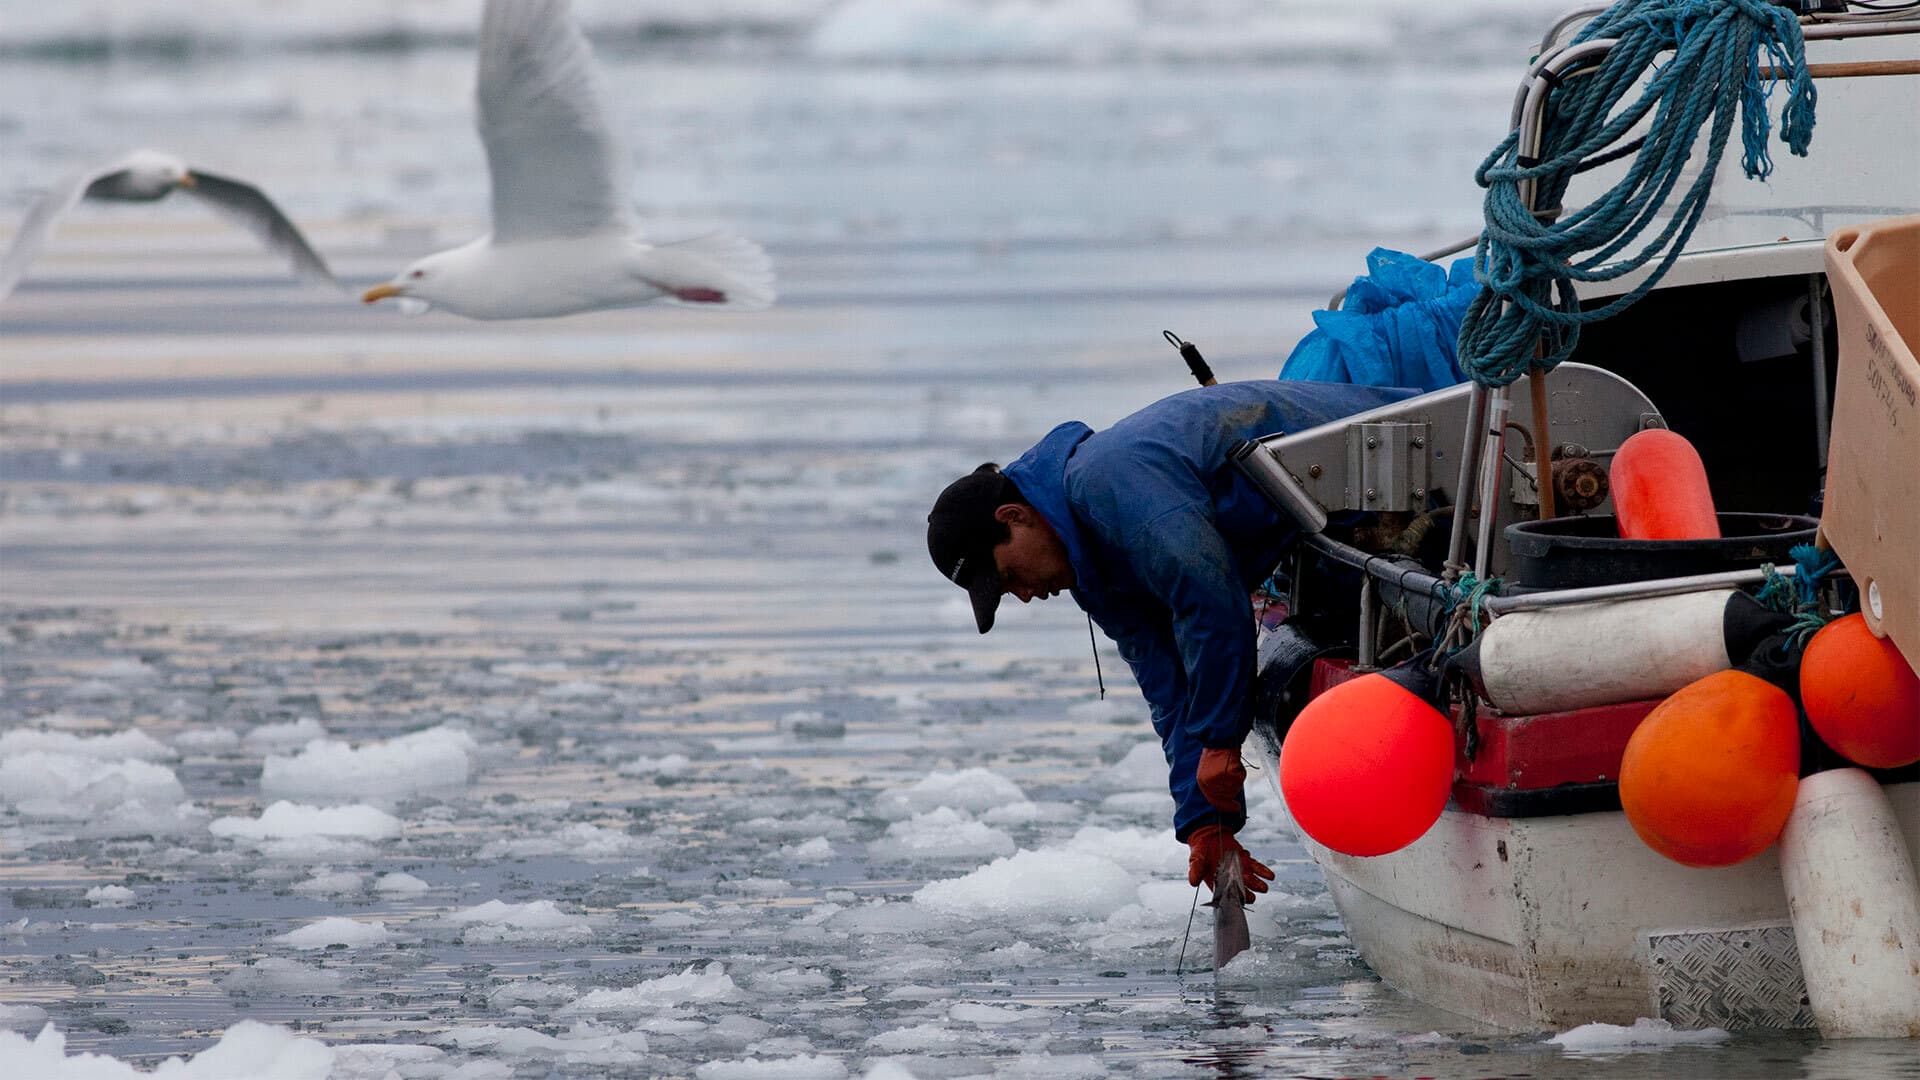 Inuit fisherman pulls in a fish on a sea filled with floating ice